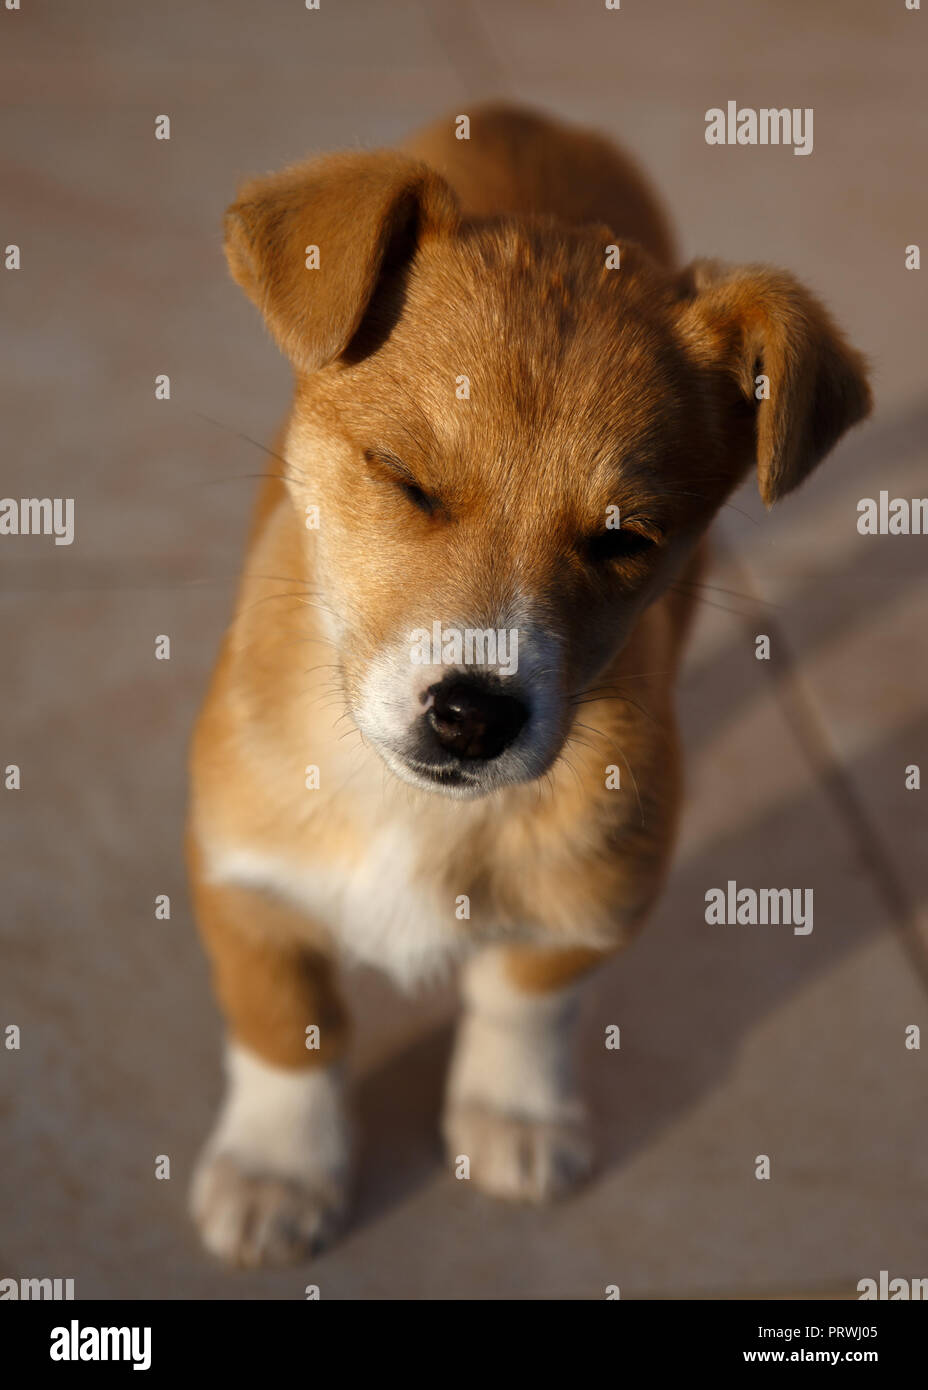 Cute puppy with funny face Stock Photo